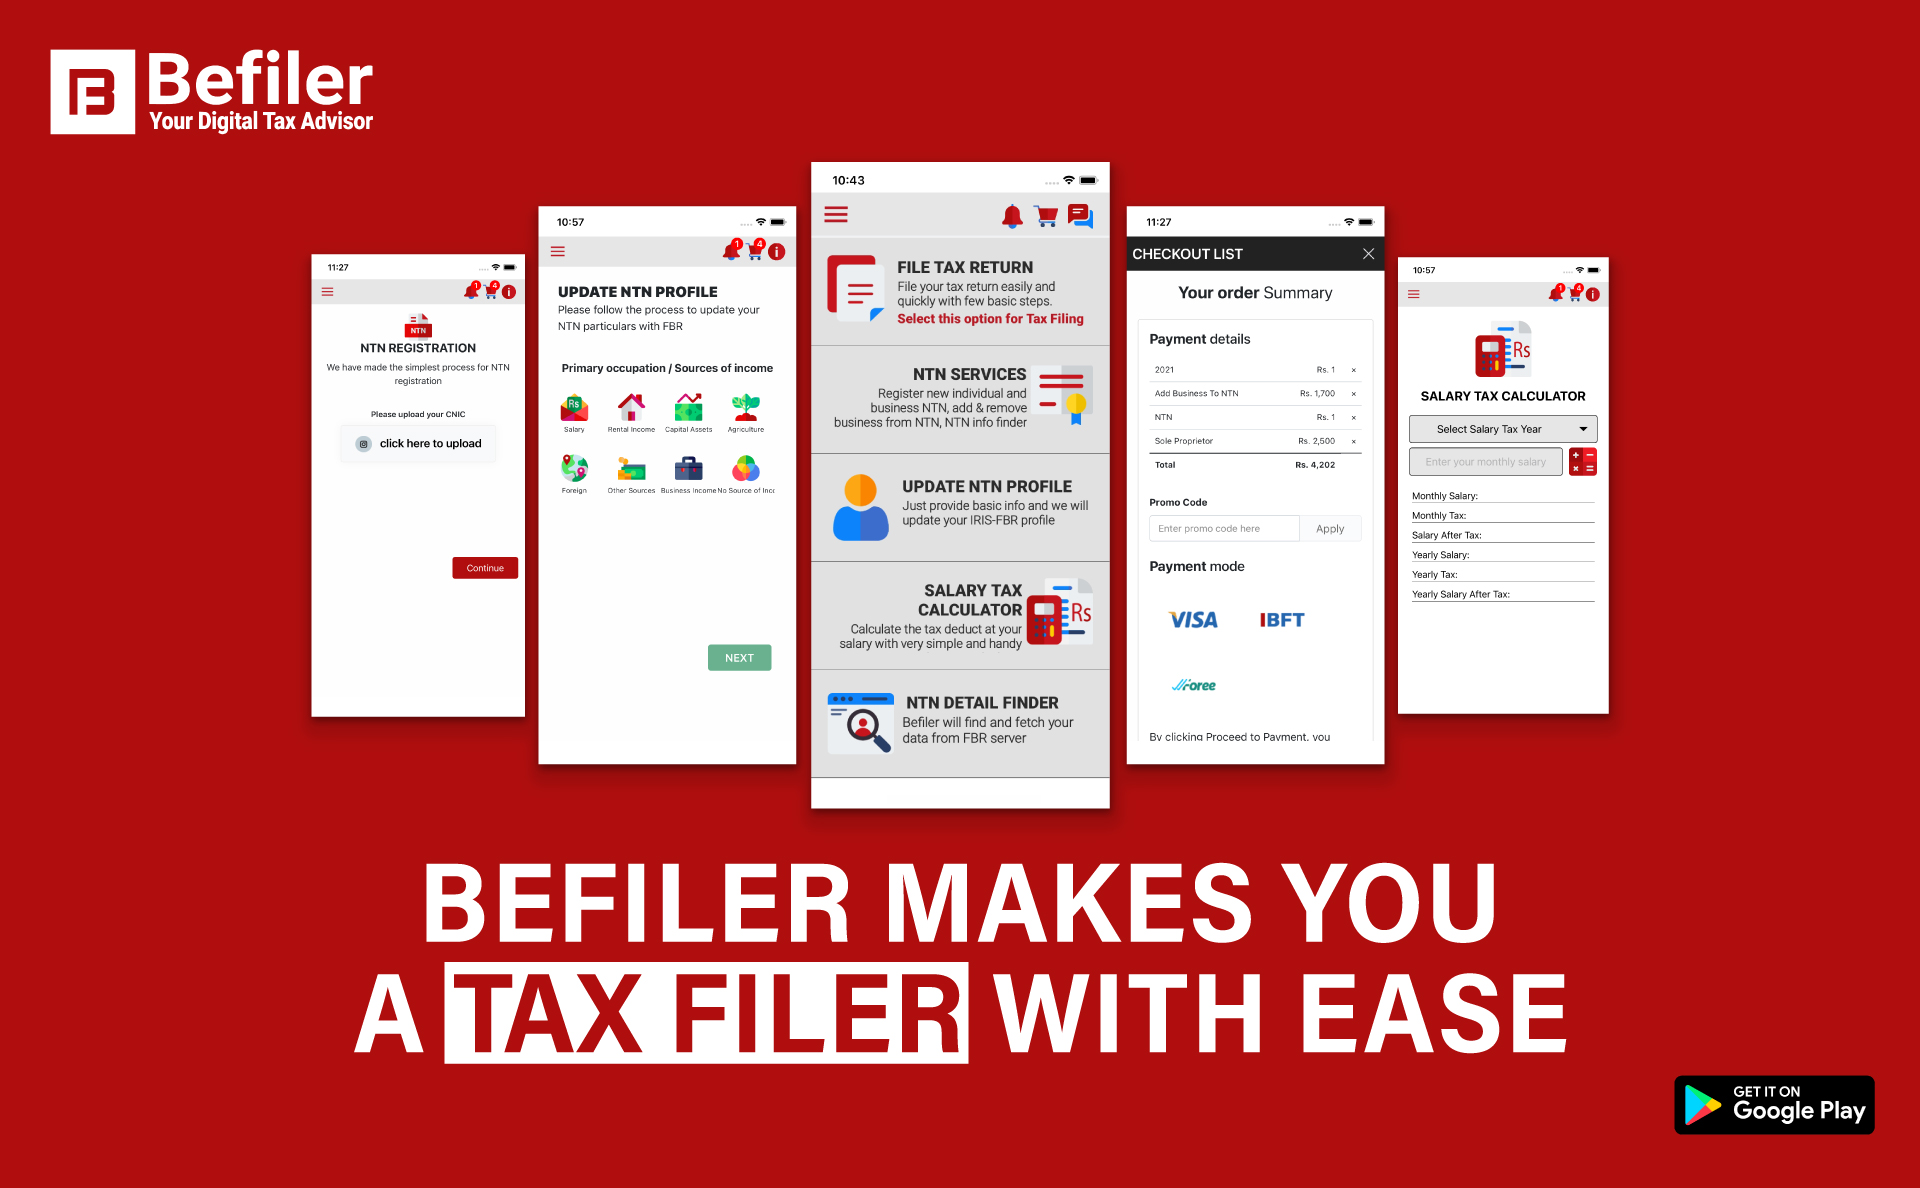 Befiler Makes You a Tax Filer with Ease